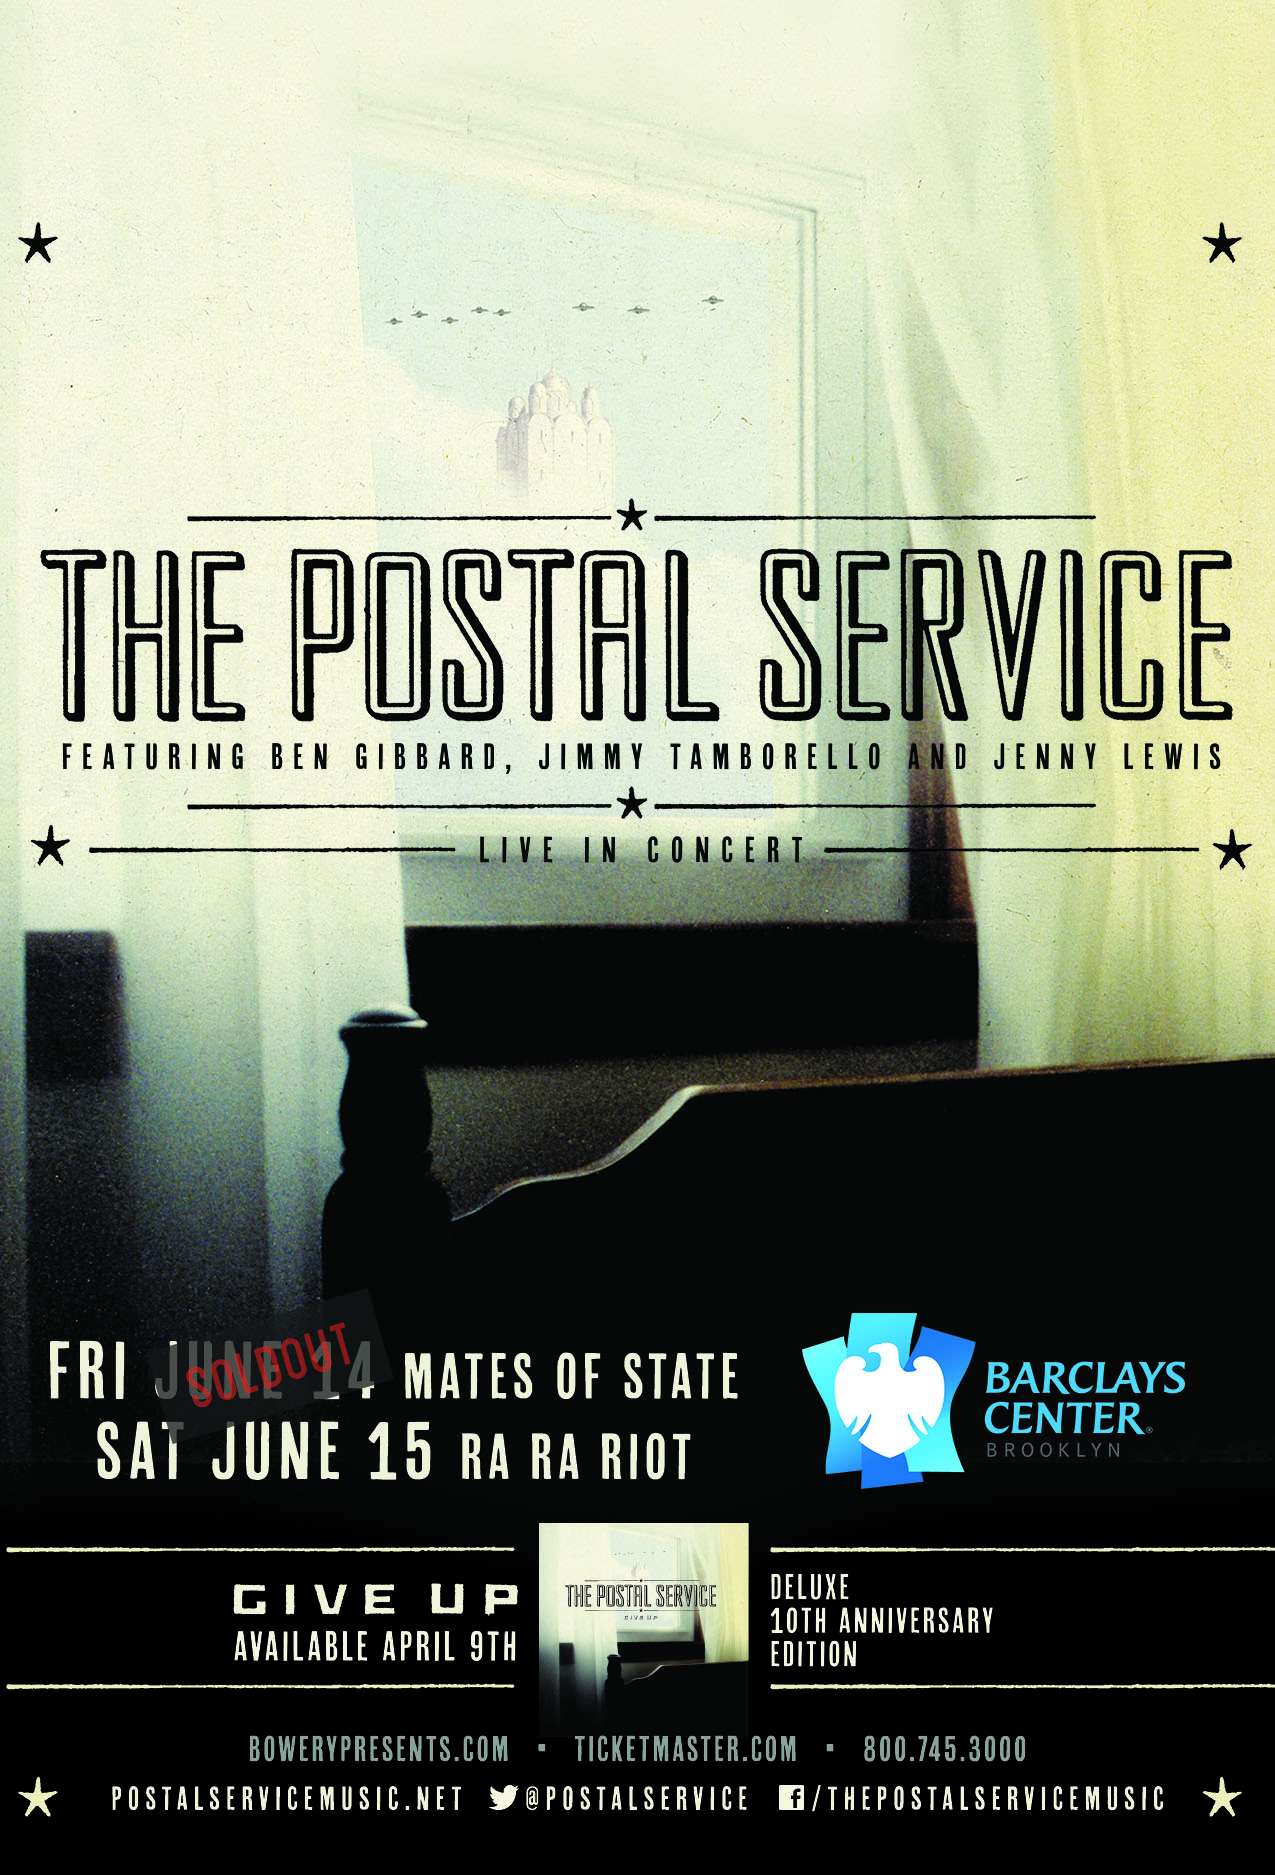 Win Tickets to See The Postal Service at NYC's Barclays Center Under